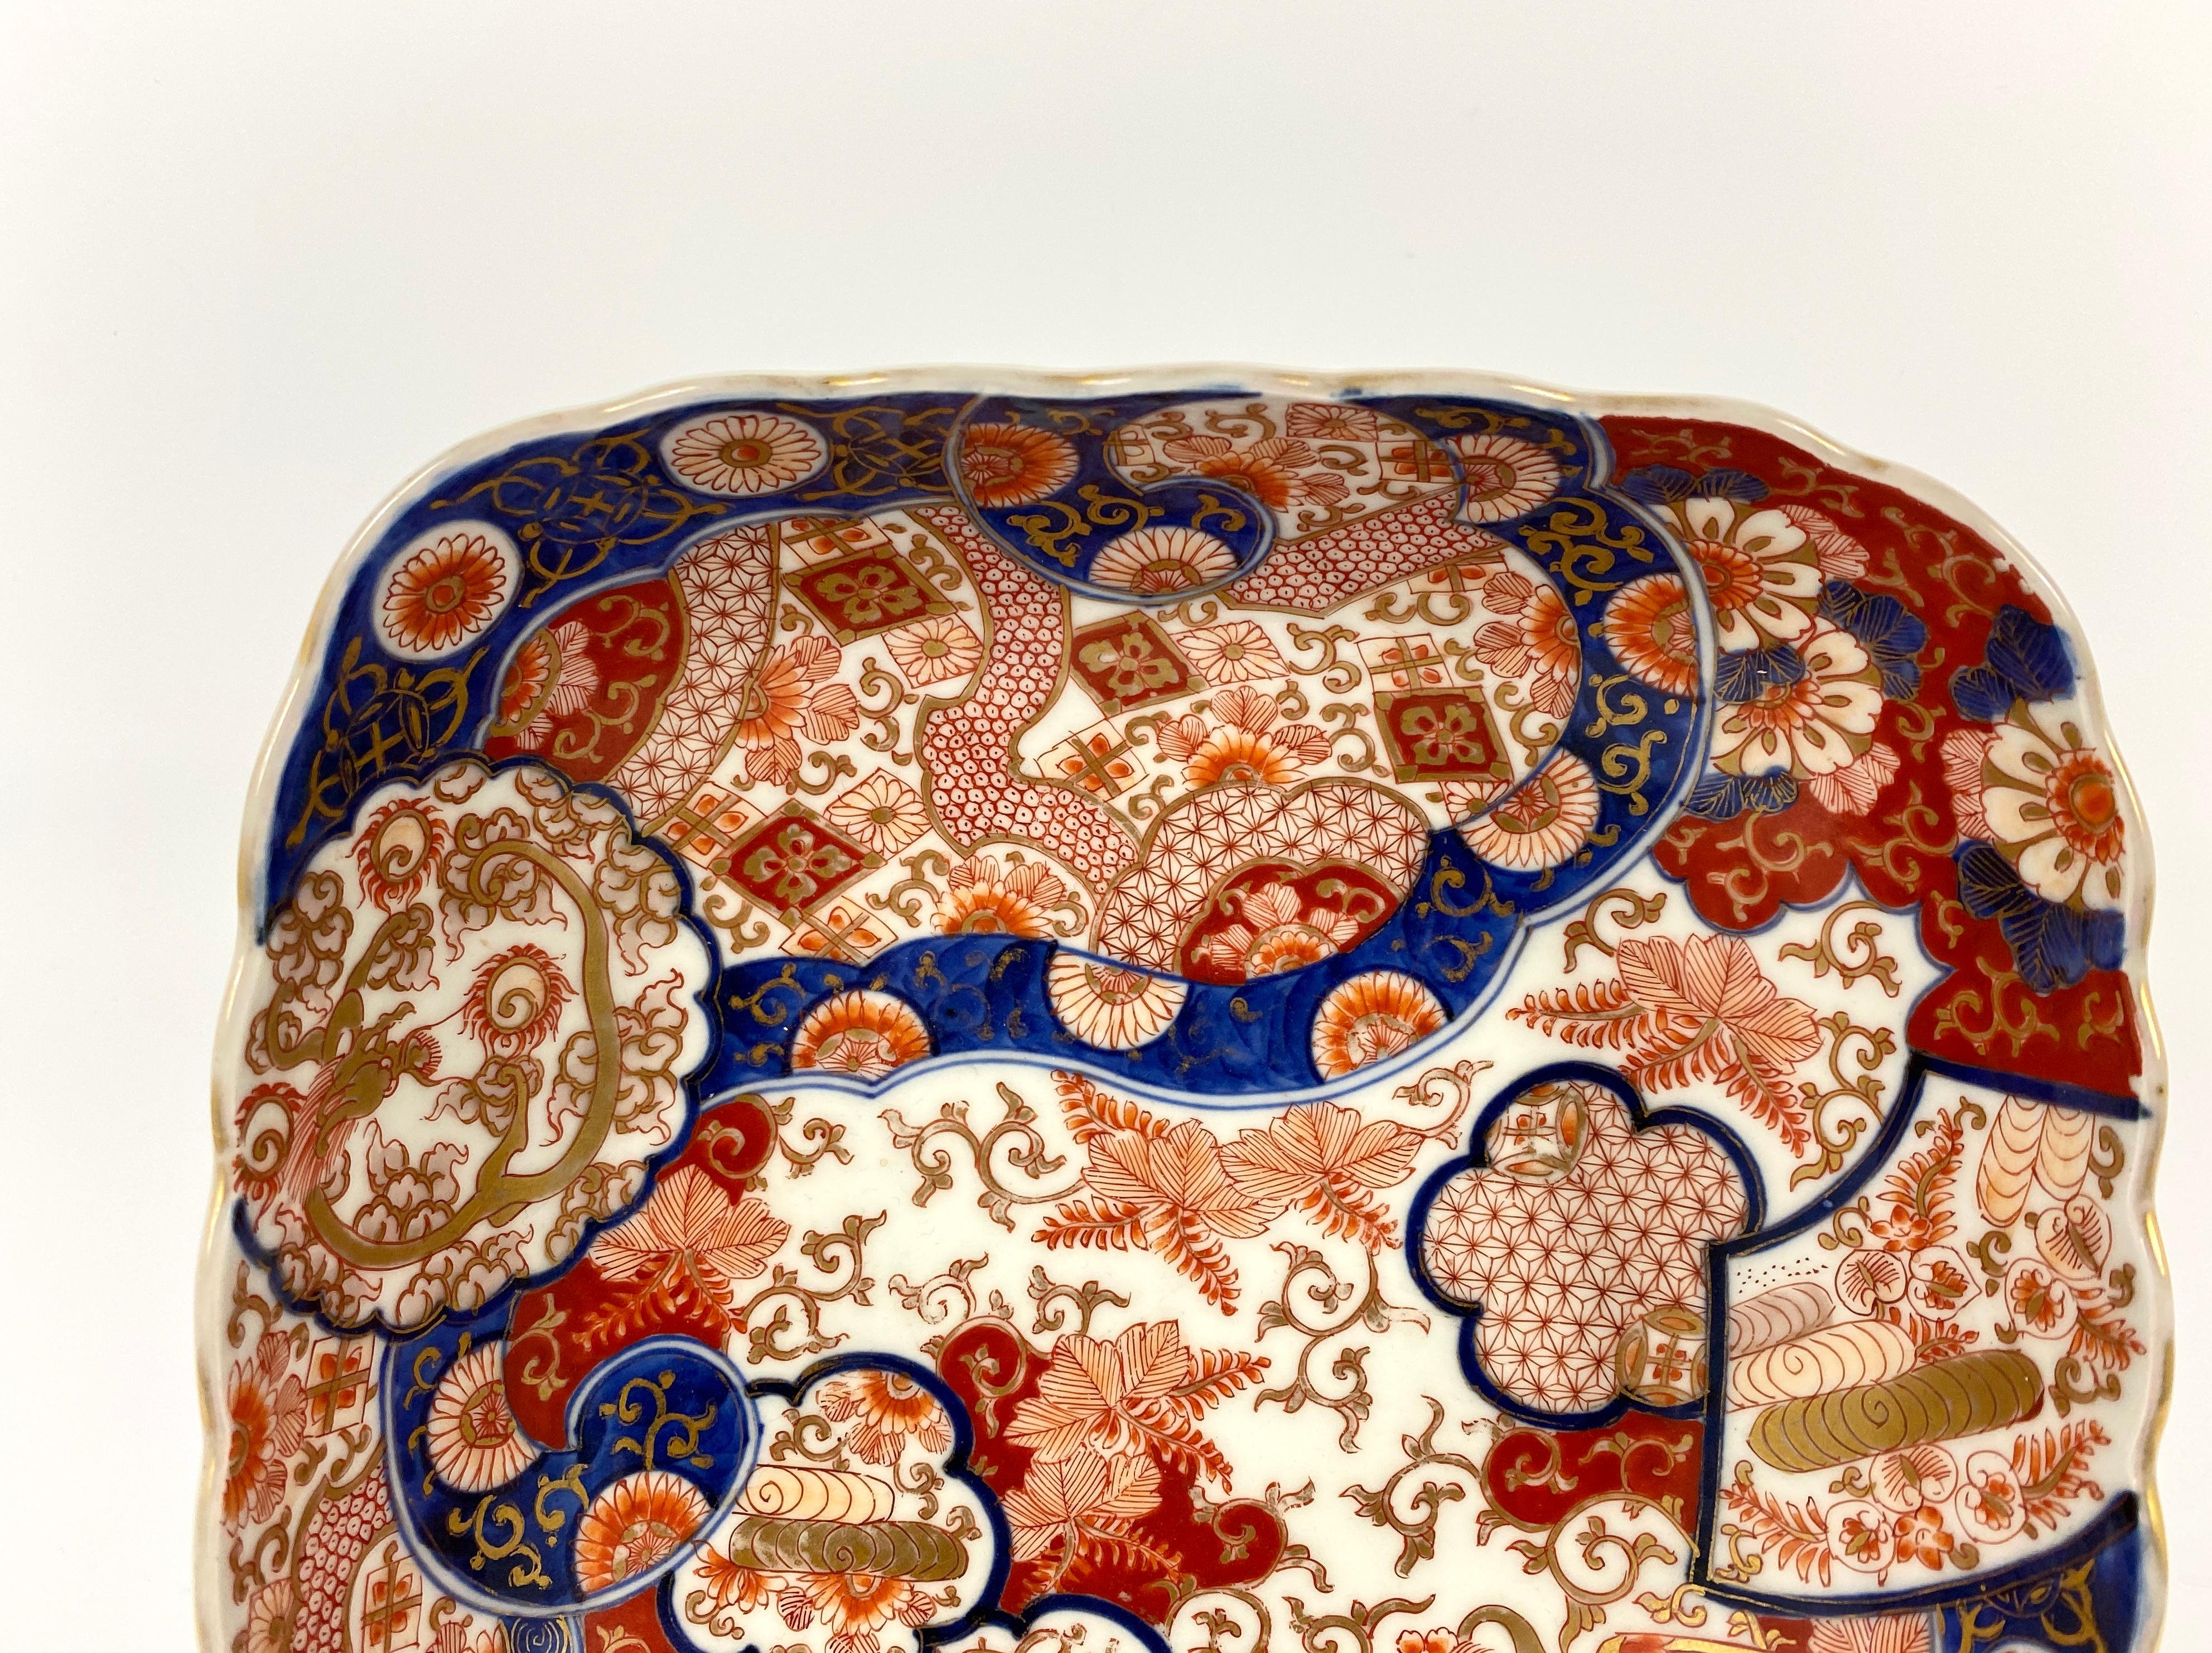 Koransha porcelain bowl, Japan, circa 1890, Meiji period. The square shaped bowl, boldly painted in the Imari style, with variously shaped, overlapping panels of dragons, flowers and textile motifs, upon similarly decorated larger panels.
The